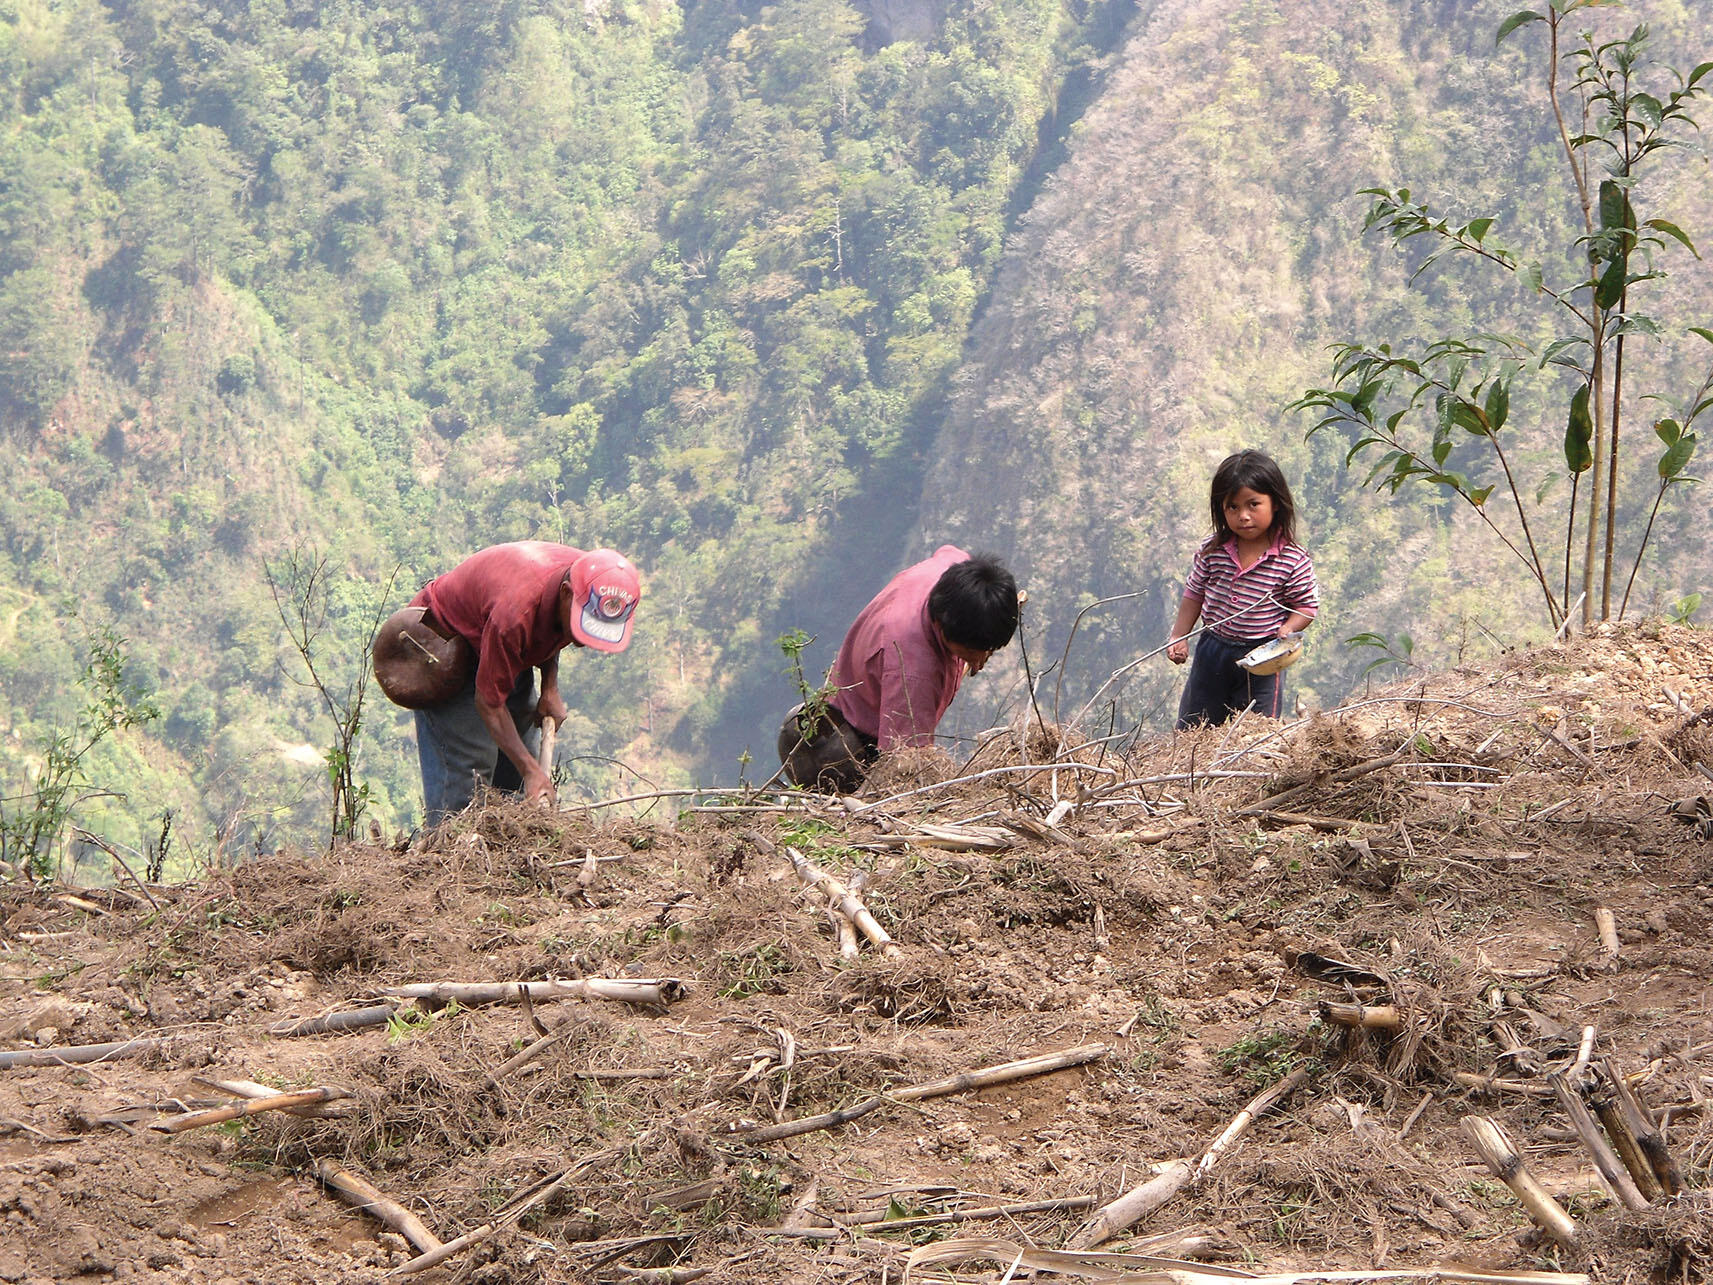 A father and his children plant corn on a steep hillside, land vulnerable to mudslides. (Photo by Carlos Manuel Citalán Marroquín.)